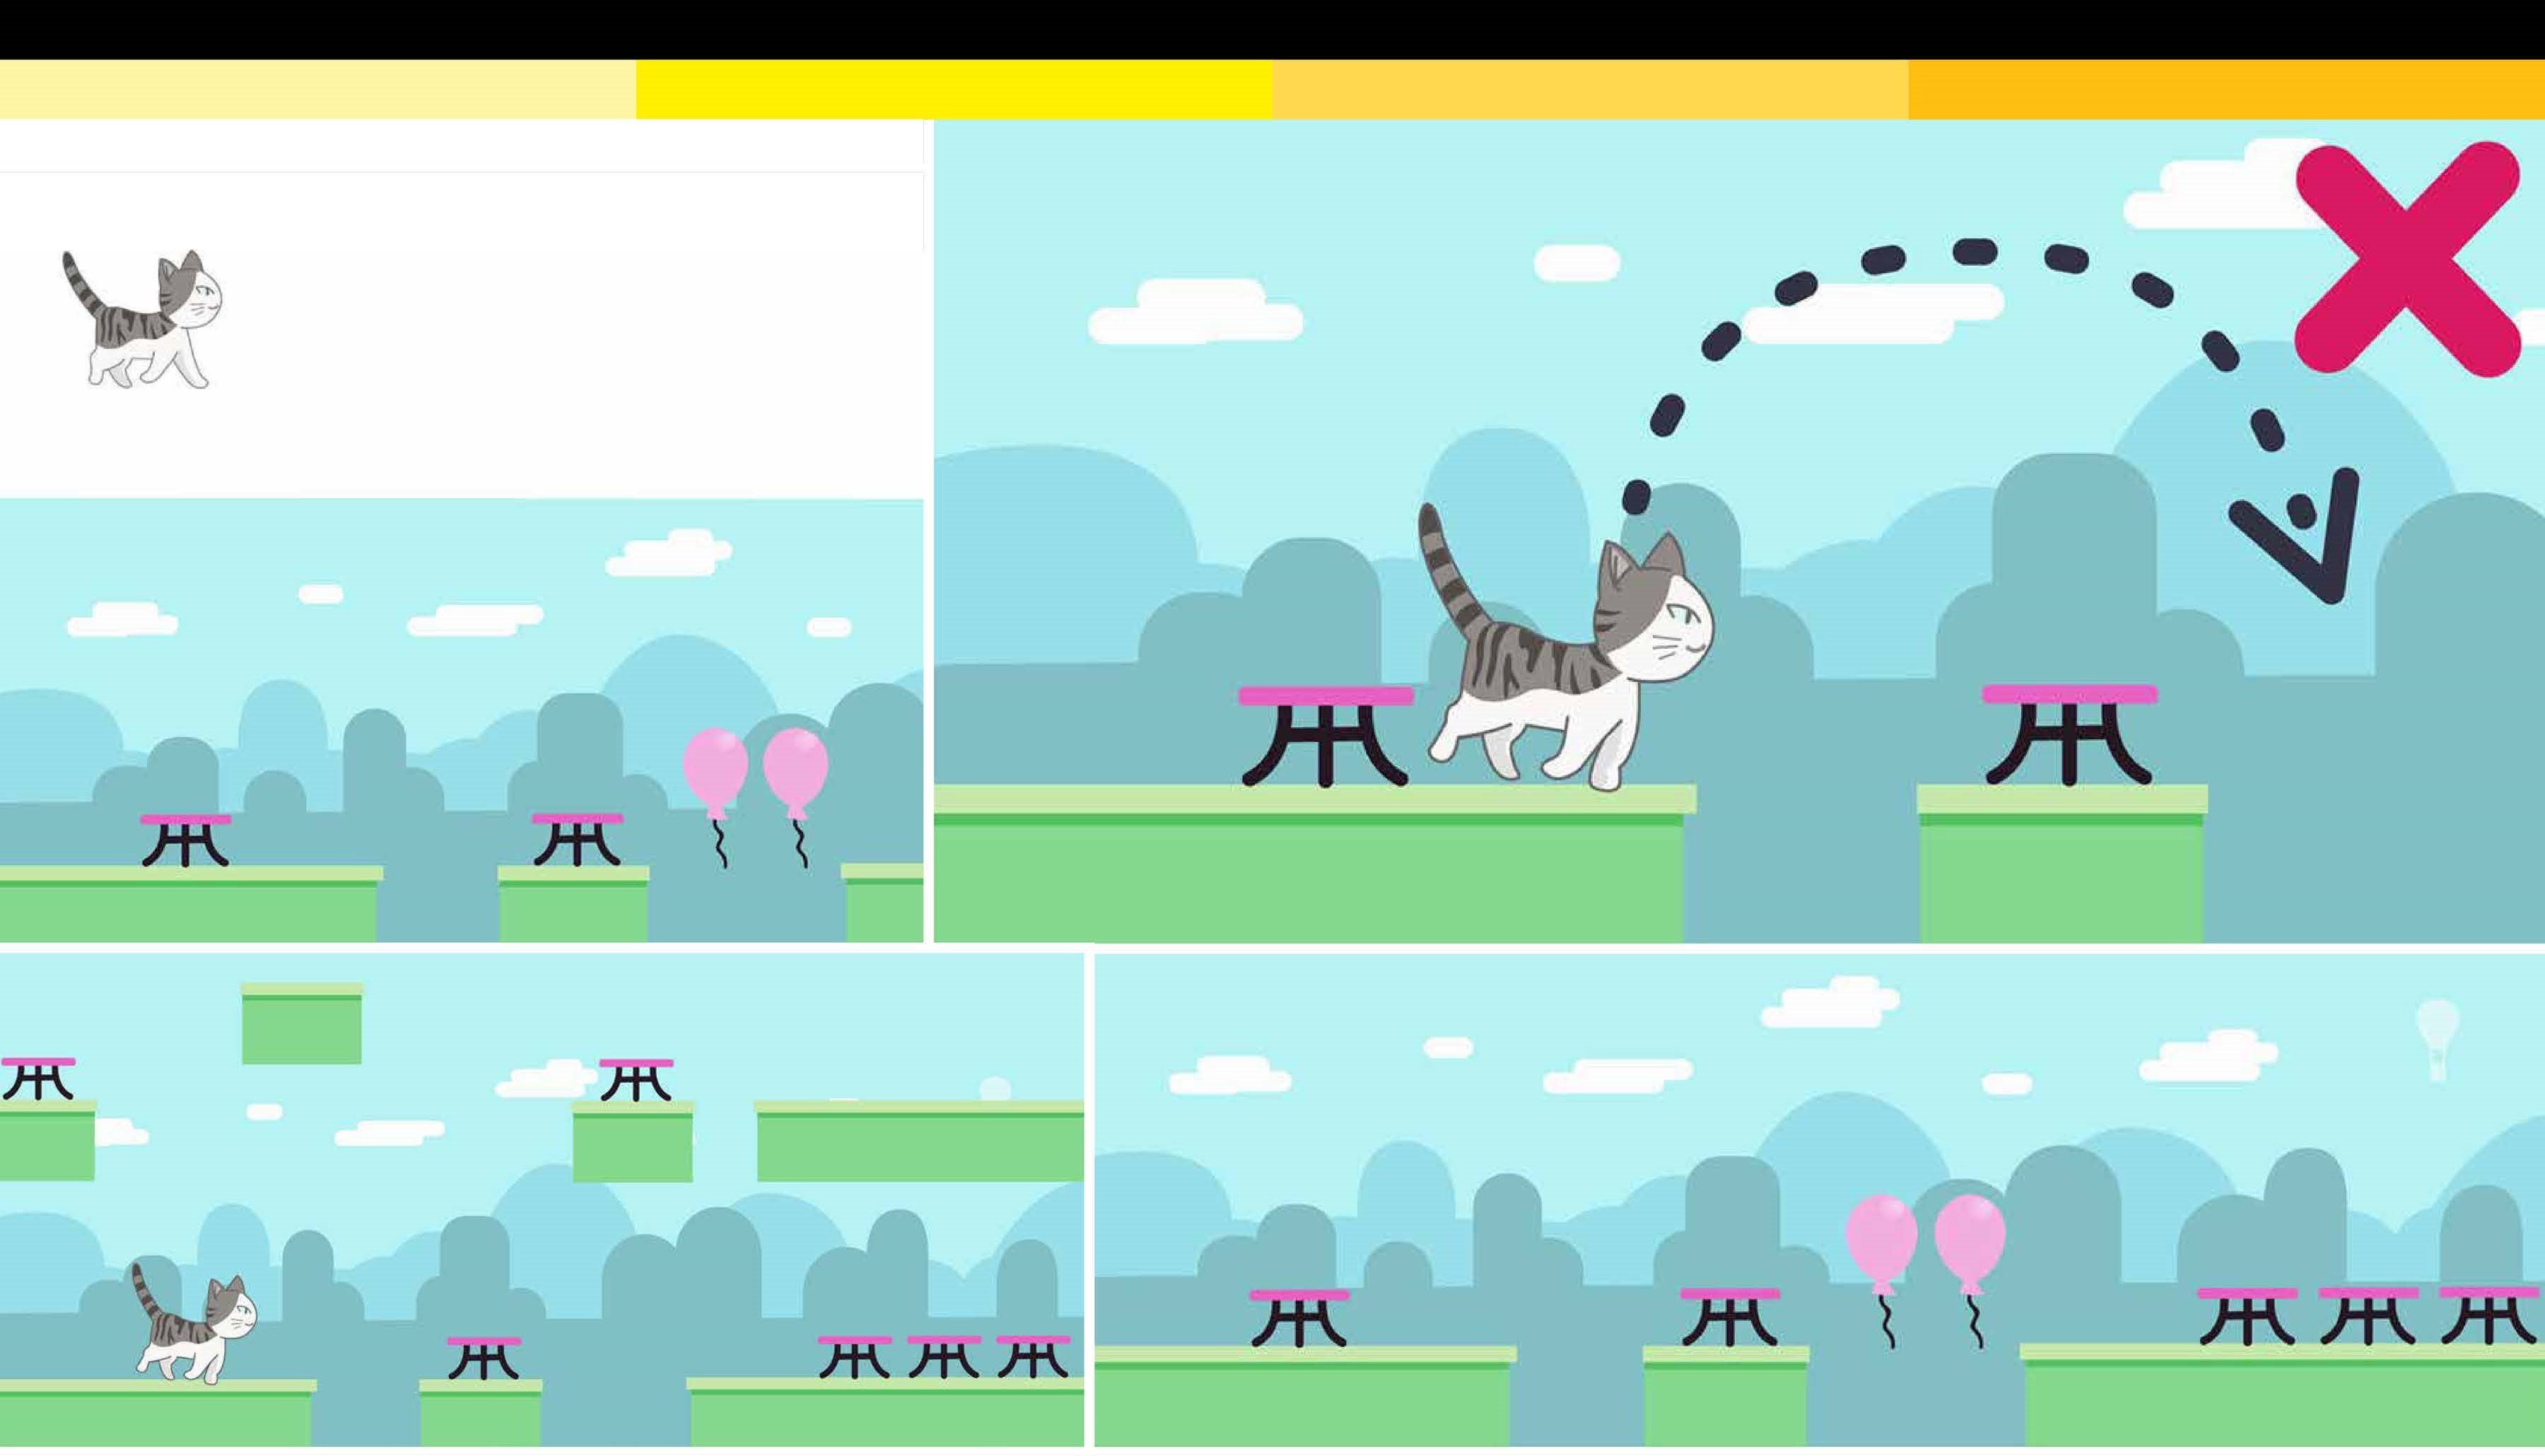 Designing Persuasively Using Playful Elements poster image of game demo; a cat jumping platforms